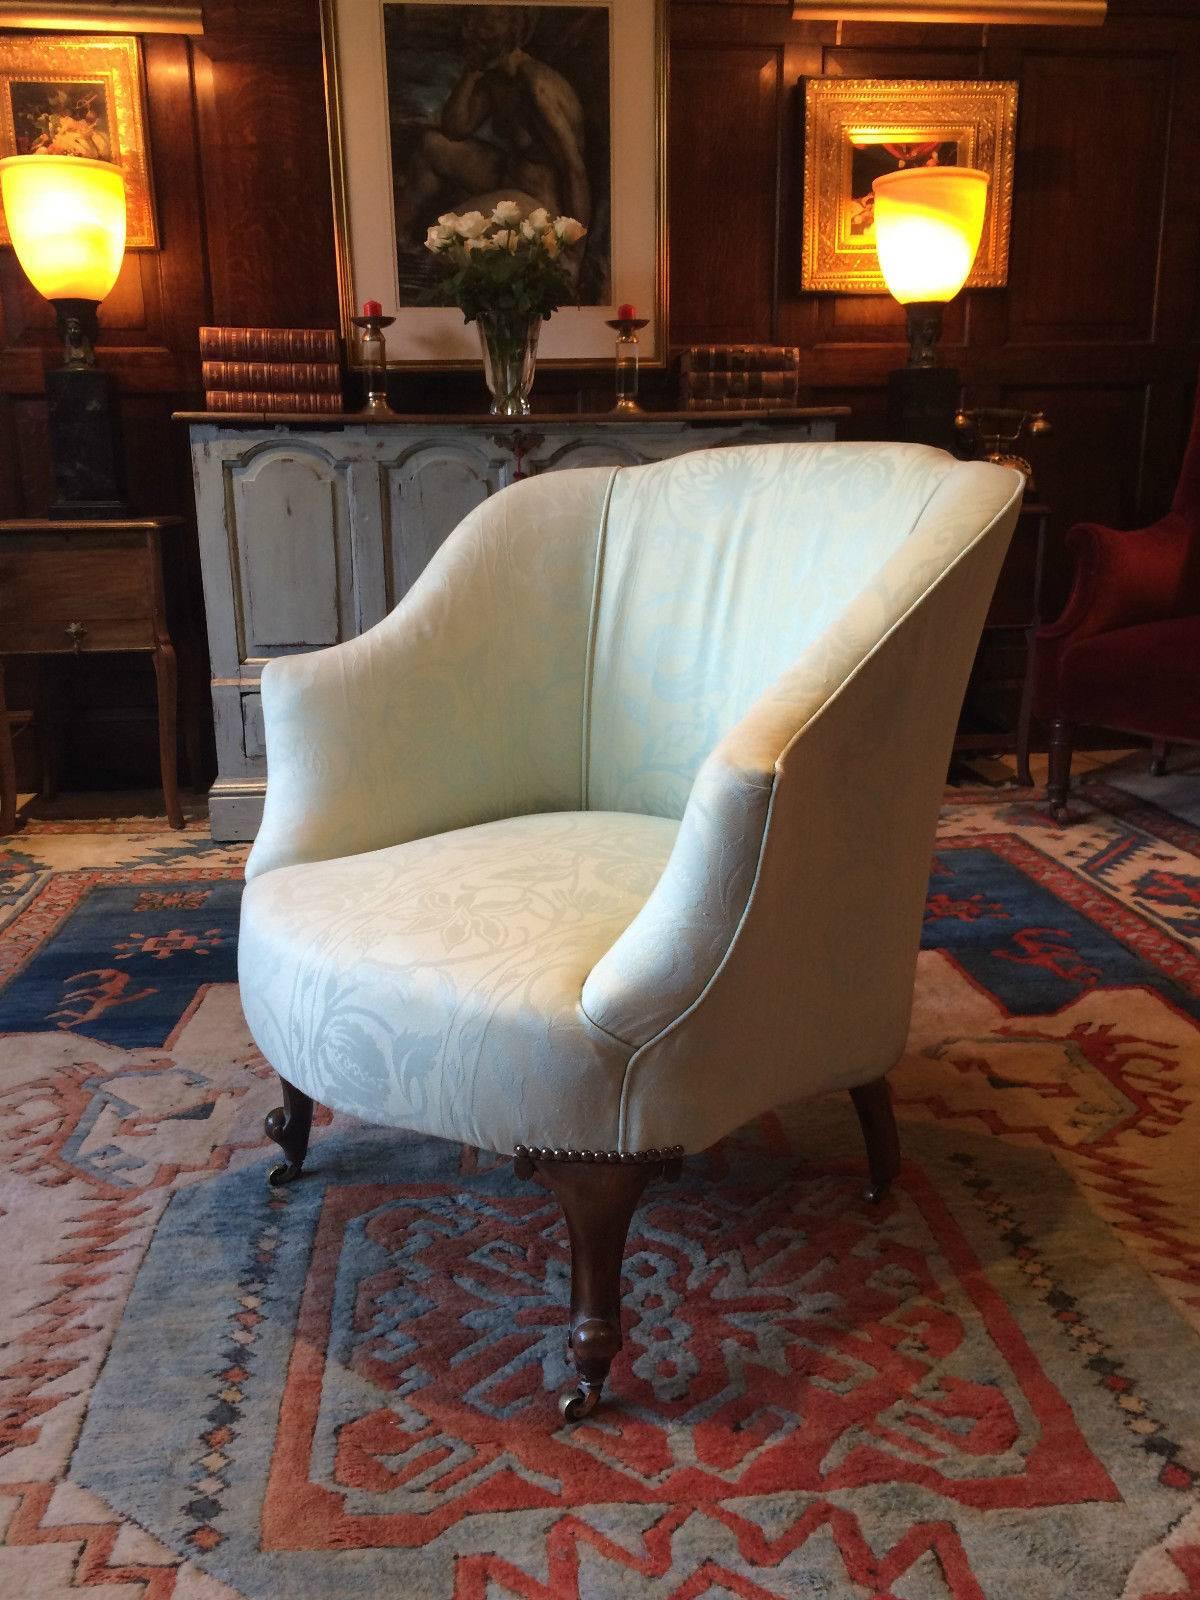 Upholstered early 20th century Edwardian Tub armchair, finished in an elegant patterned green silk fabric and raised on cabriole legs terminating with brass casters, the chair is offered in excellent condition.